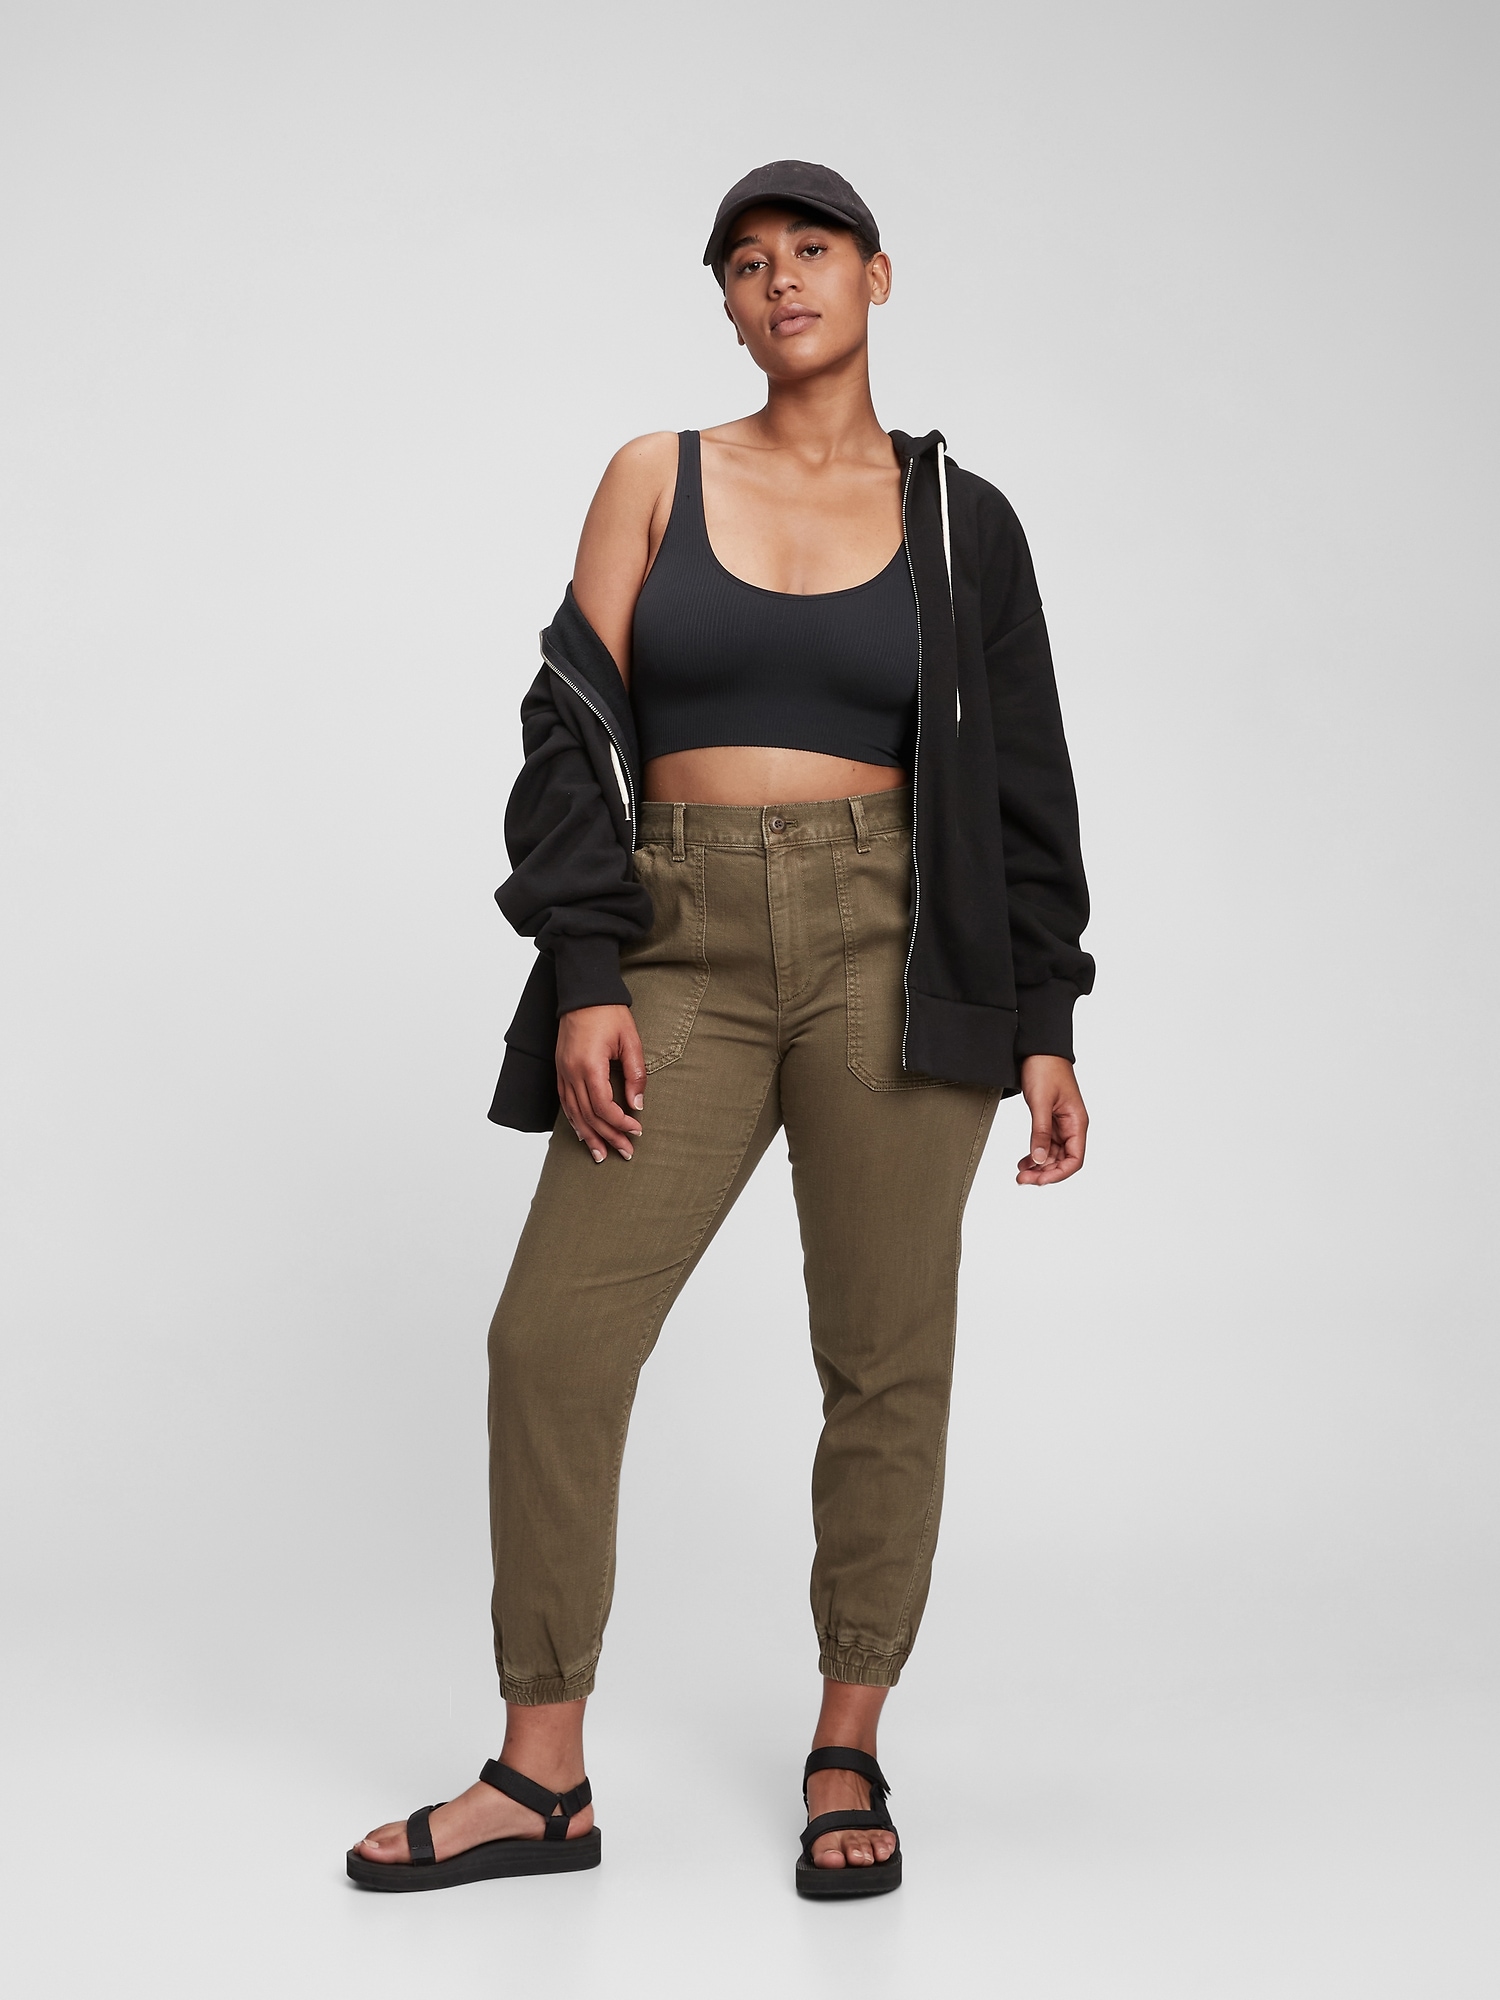 Organique - Lyocell Oversized Jogger Trousers